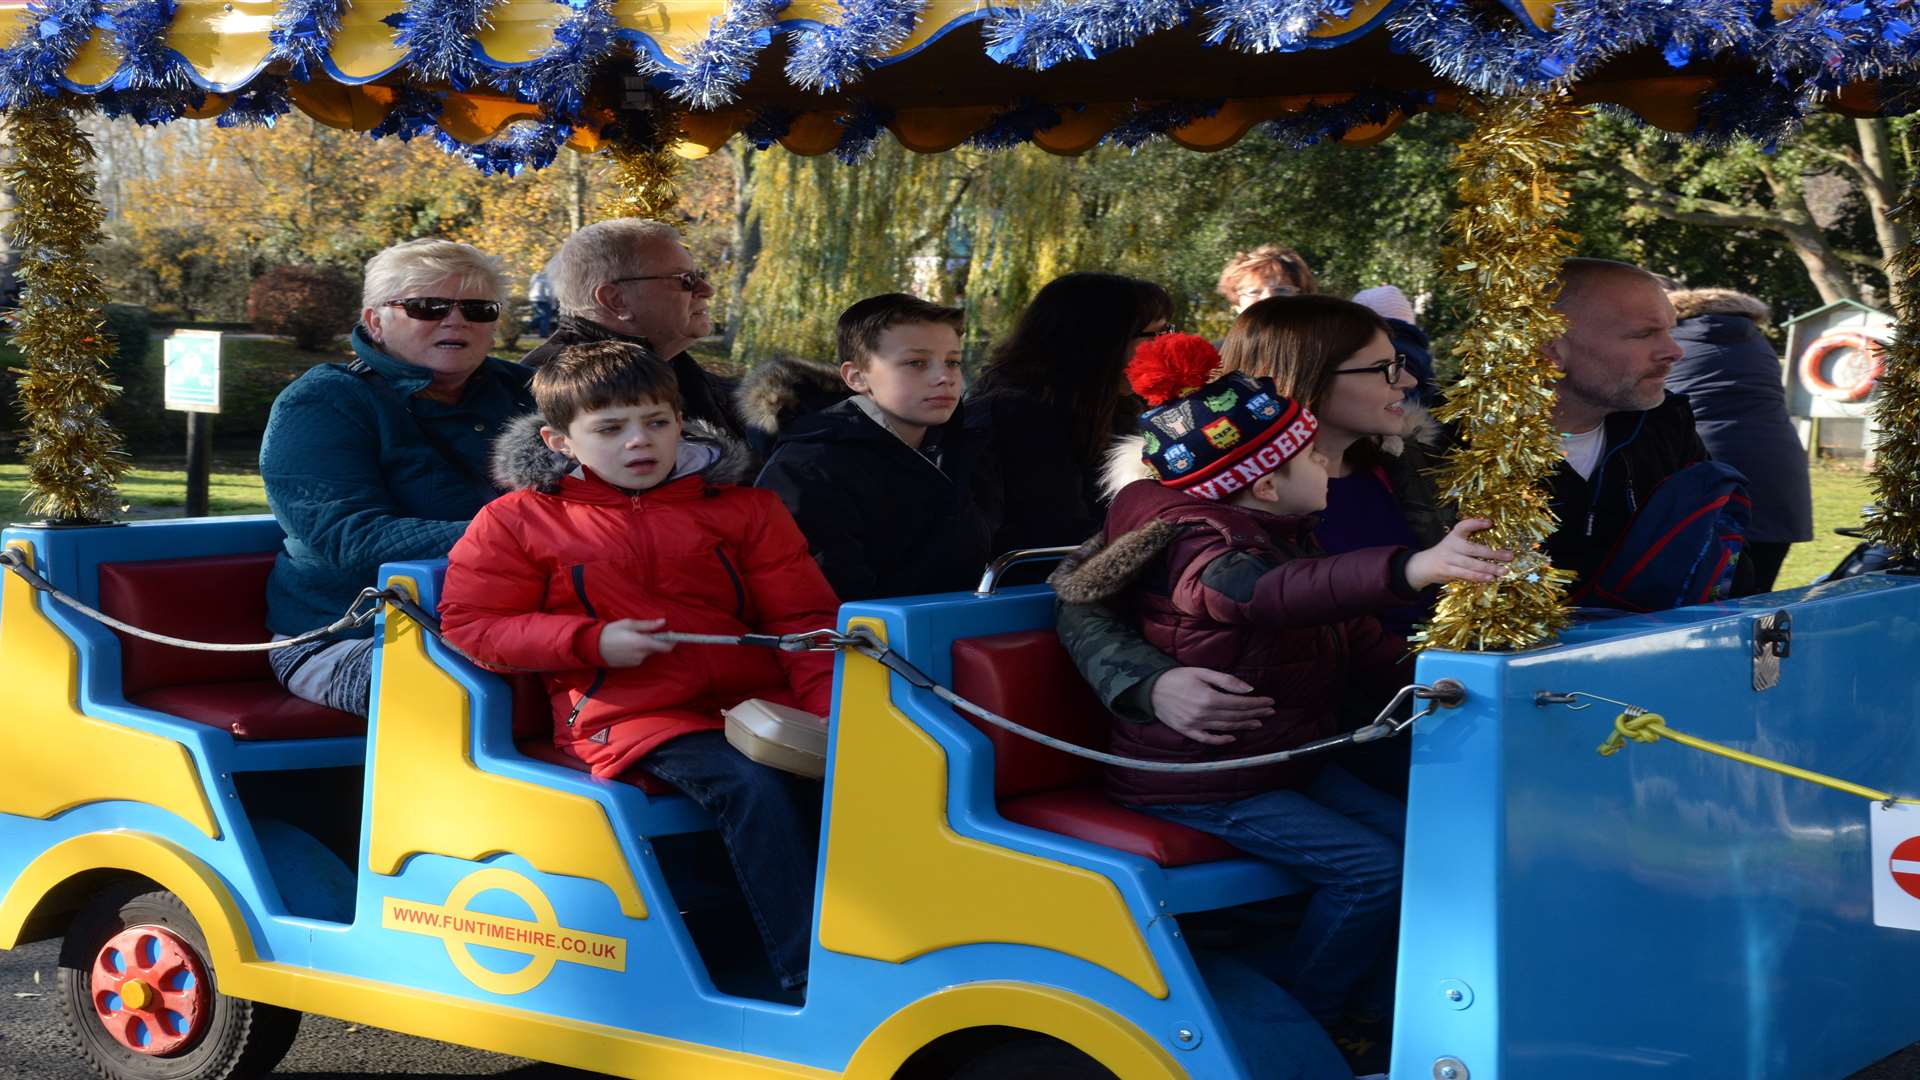 The land train had lots of passengers at the Christmas fair held at Aylesford Priory on Saturday.